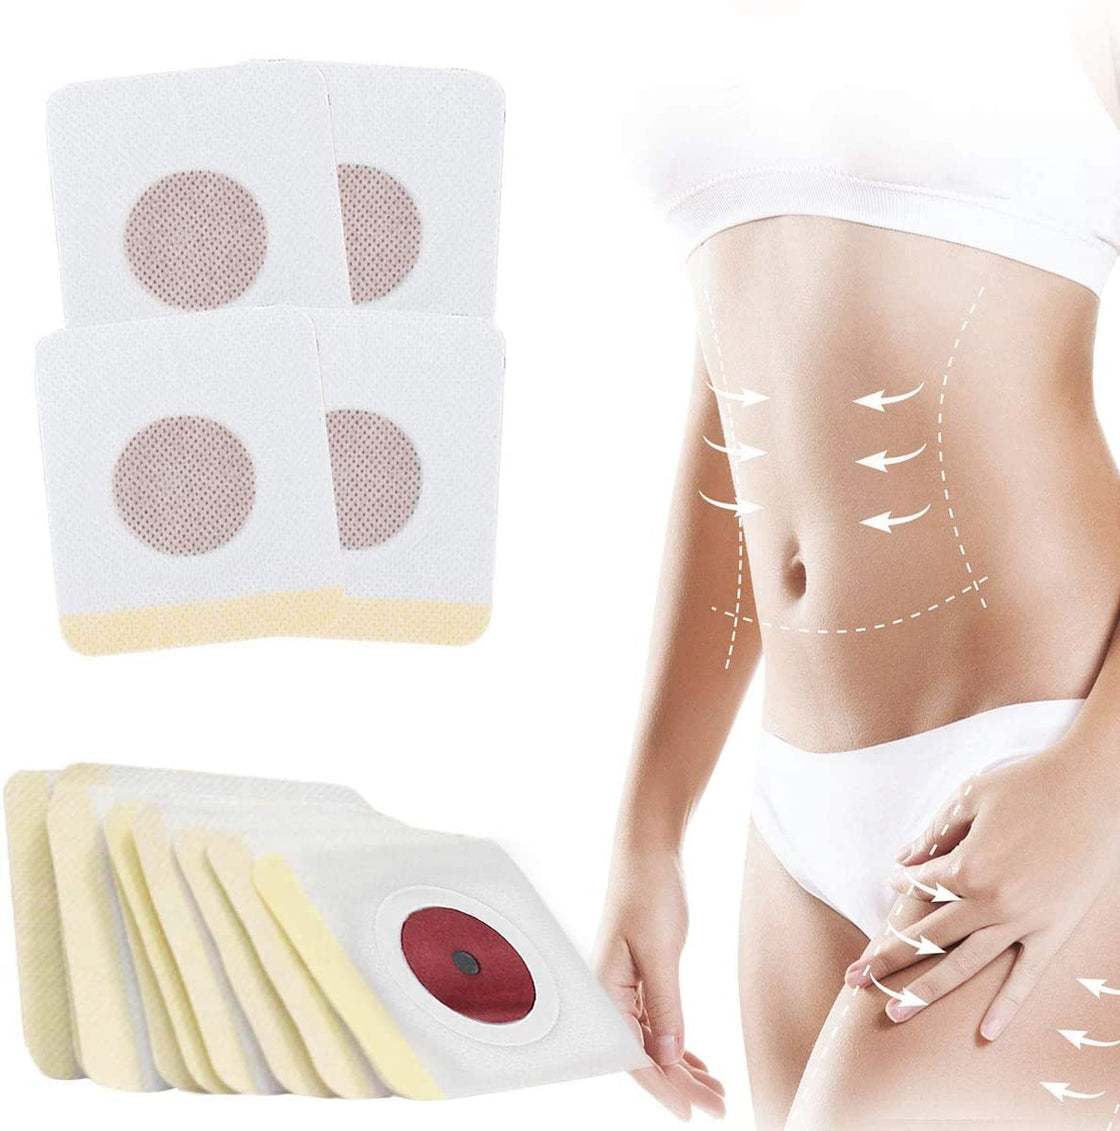 Slimming Patch10 Pcs Magnet Weight Reduce Fat Burning Lose Weight